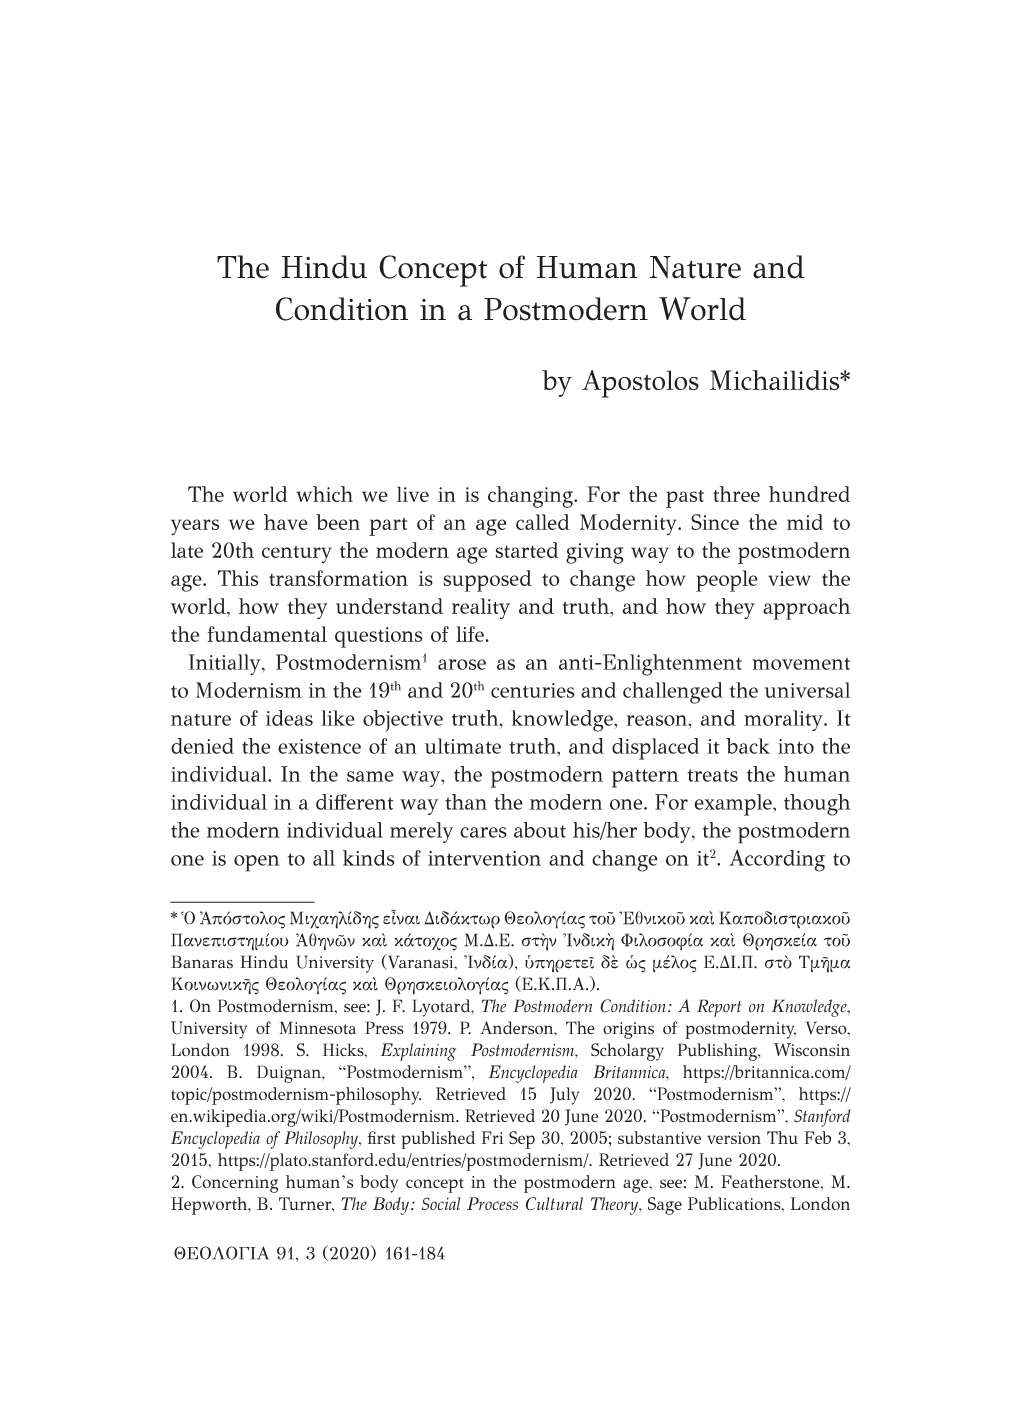 The Hindu Concept of Human Nature and Condition in a Postmodern World